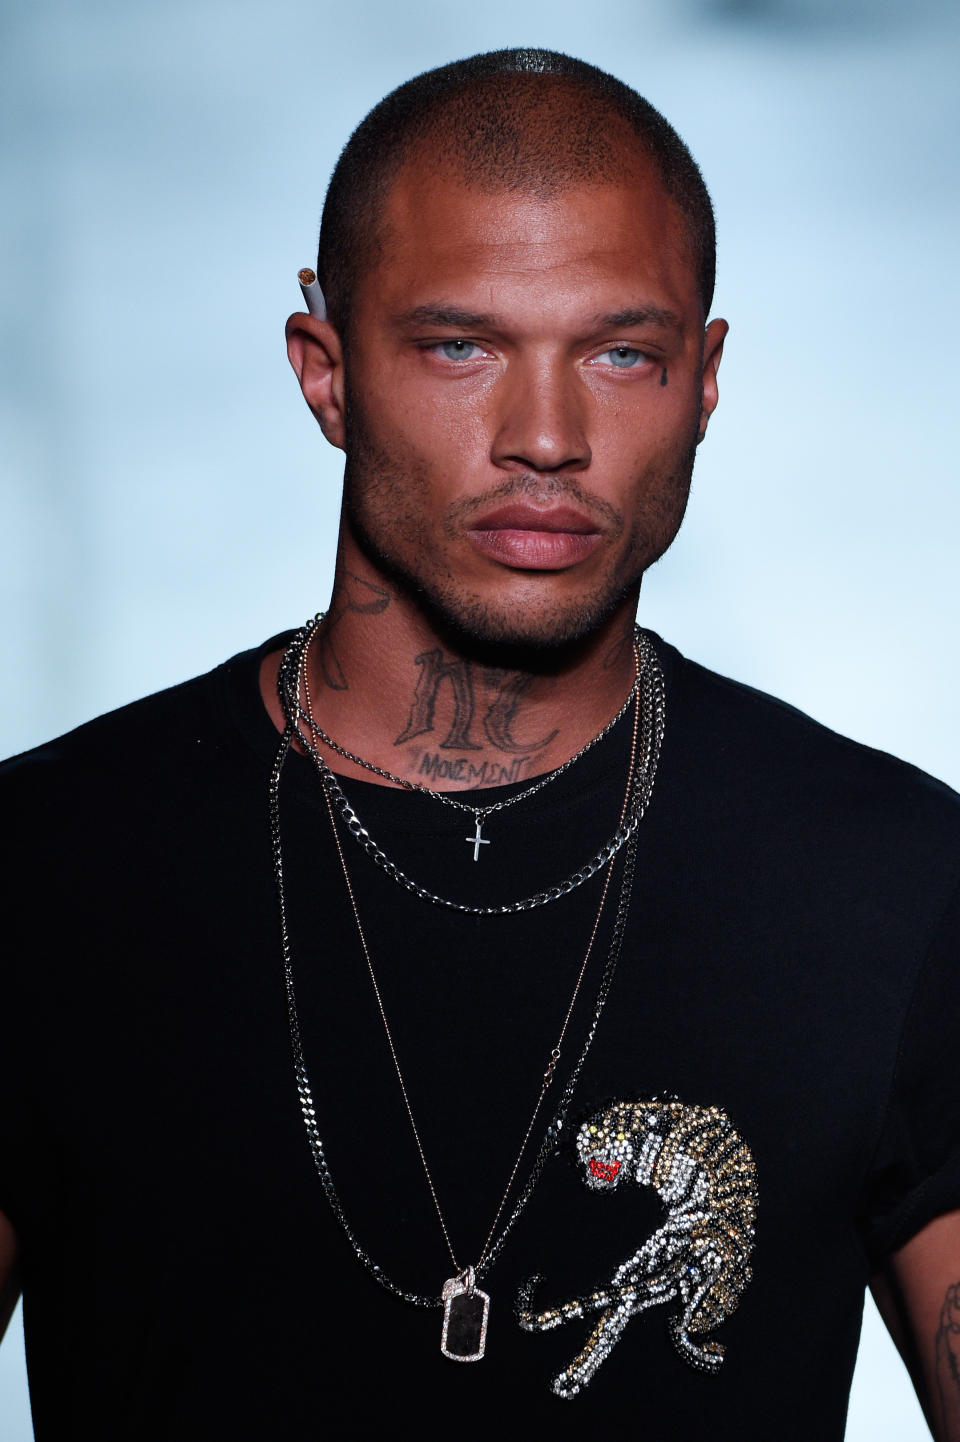 Model Jeremy Meeks, who went viral a few years ago after his handsome mugshot appeared on Facebook, took the Milan runways by storm this past weekend.